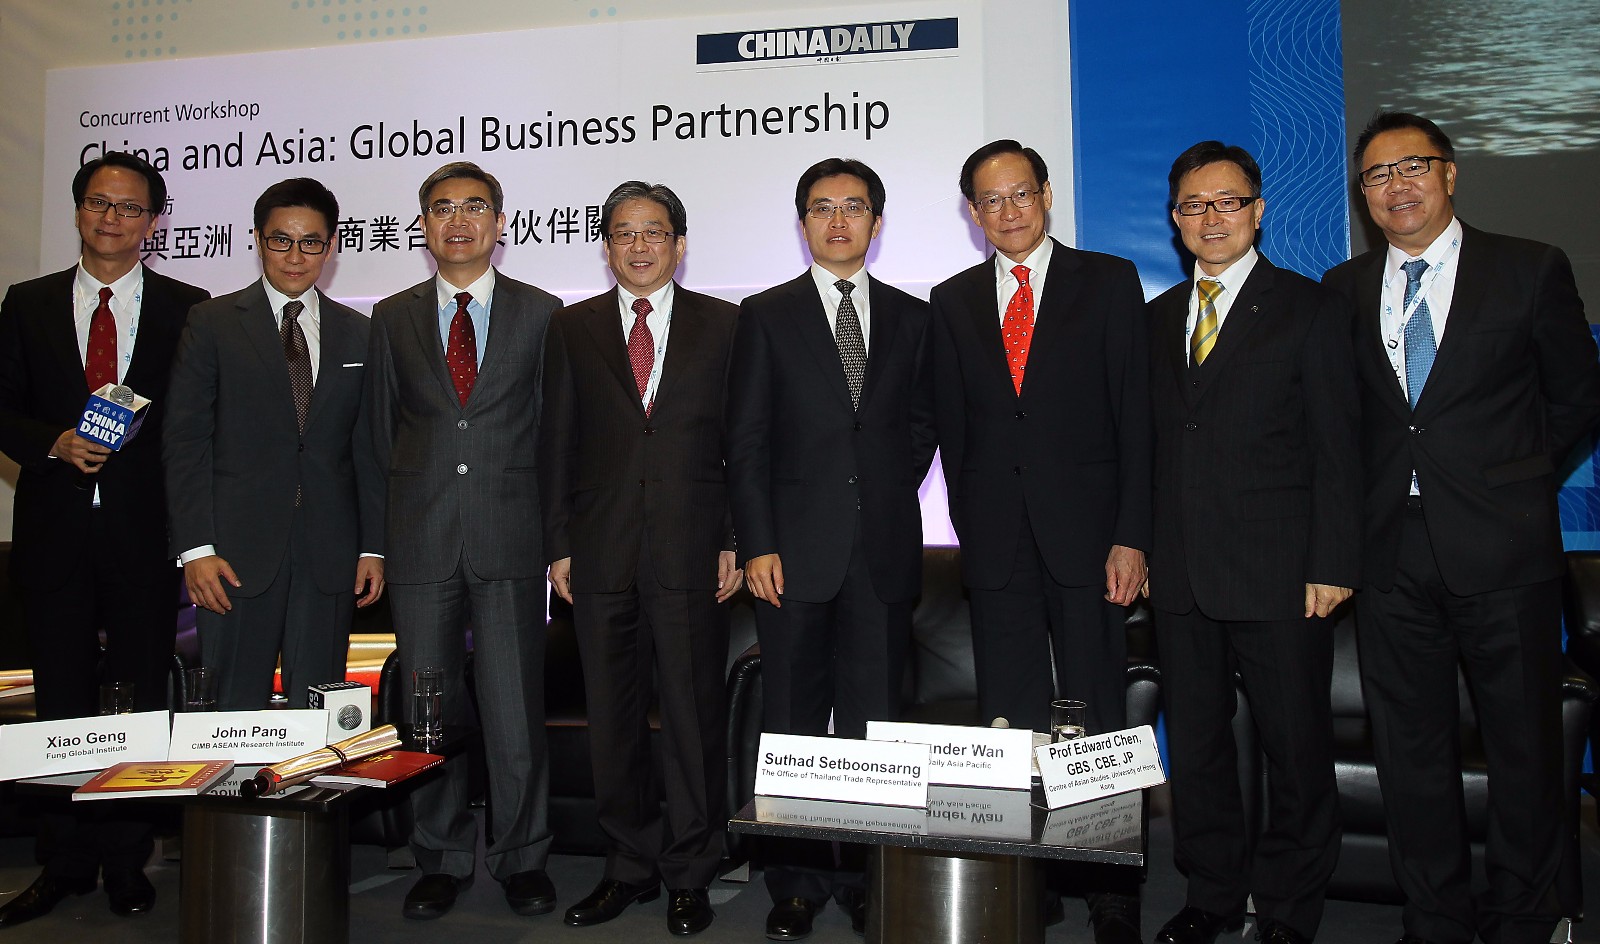 Press Release: "China and Asia: Global Business Partnership"